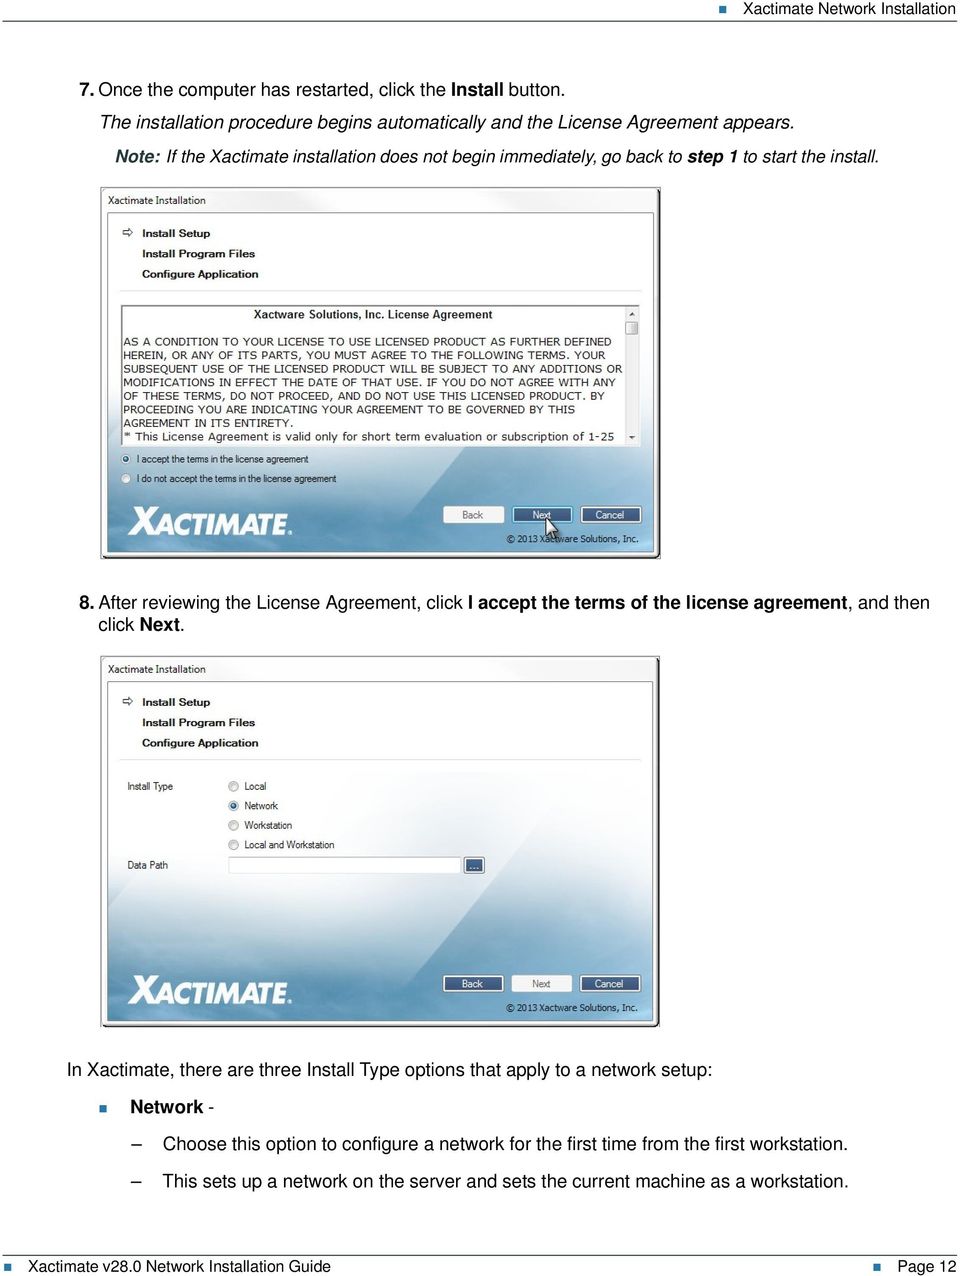 After reviewing the License Agreement, click I accept the terms of the license agreement, and then click Next.